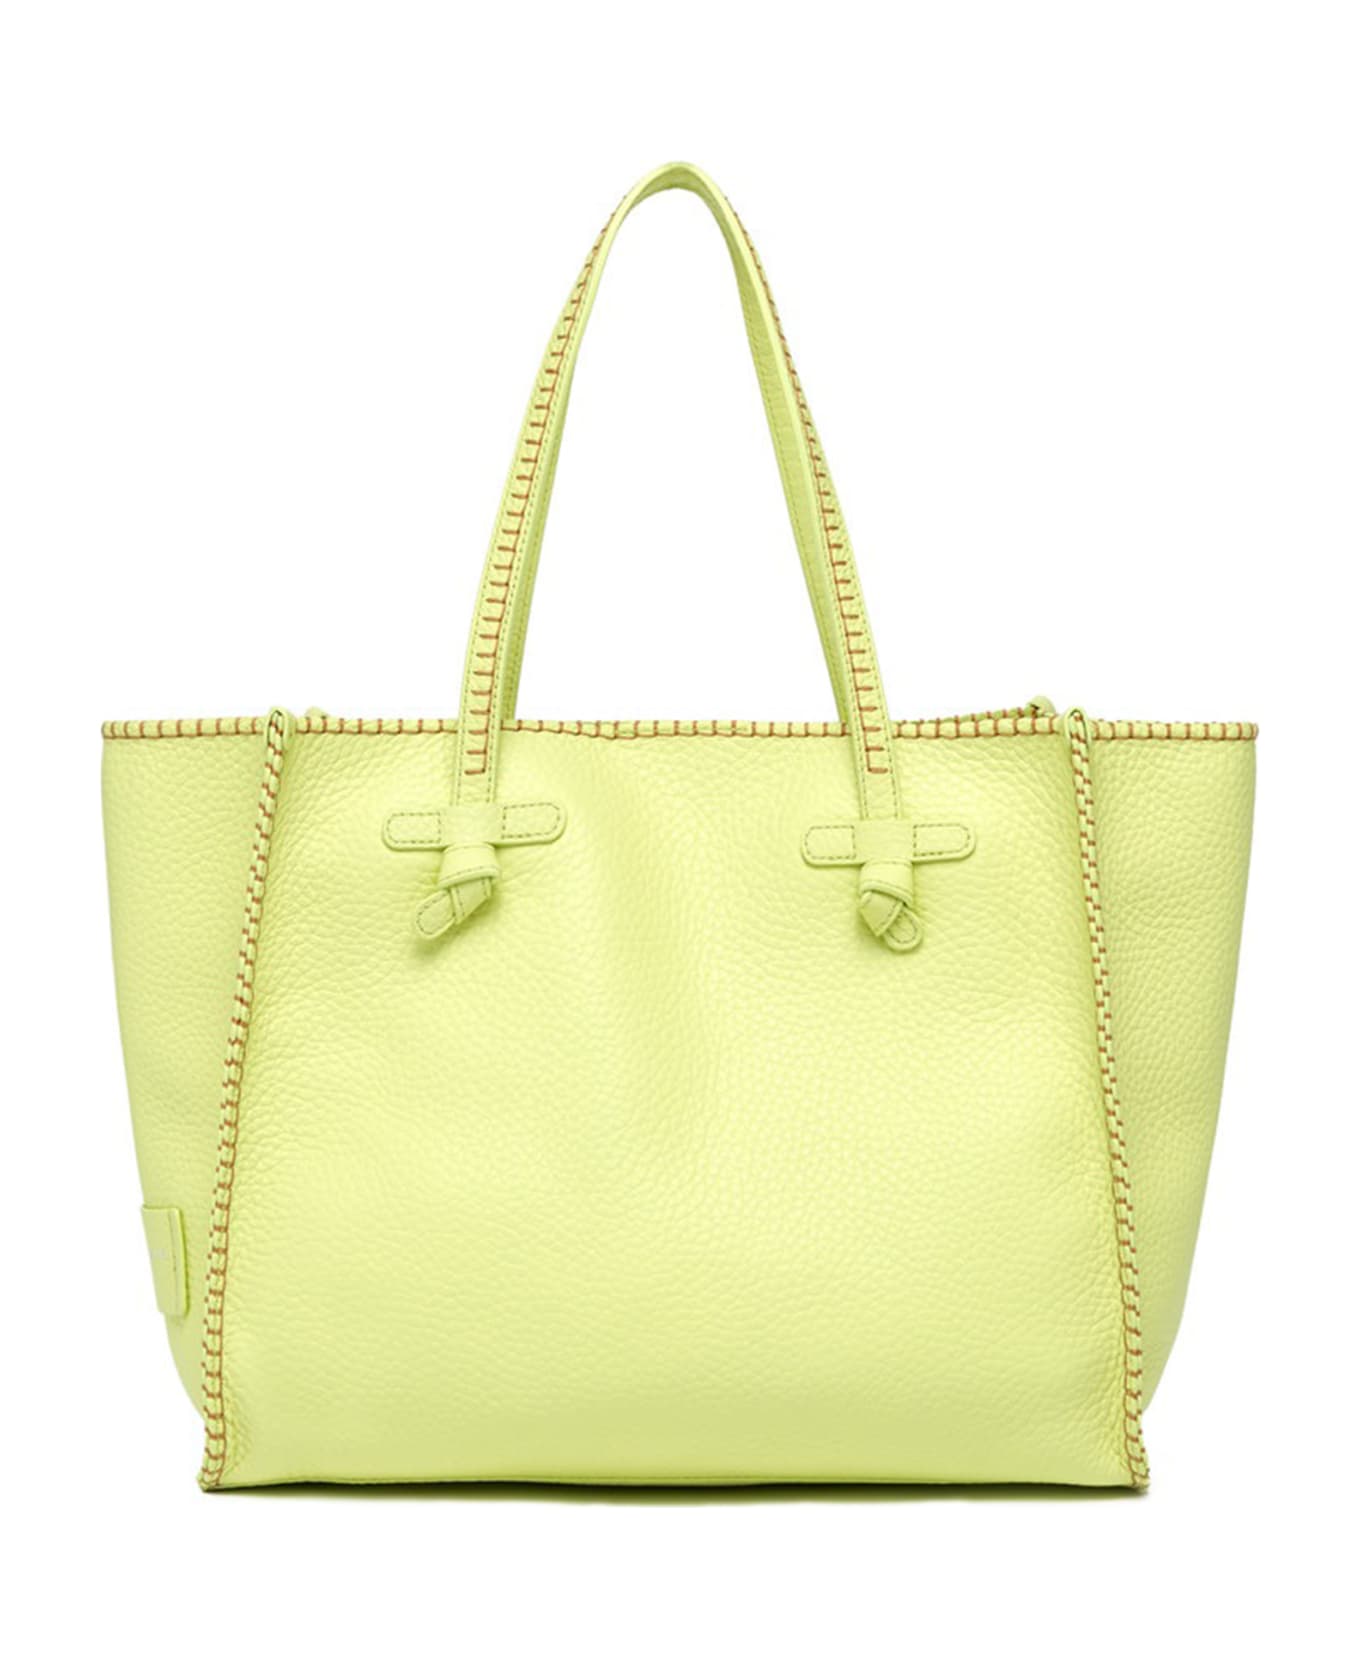 Gianni Chiarini Marcella Shopping Bag In Bubble Leather - SUNNY LIGHT トートバッグ